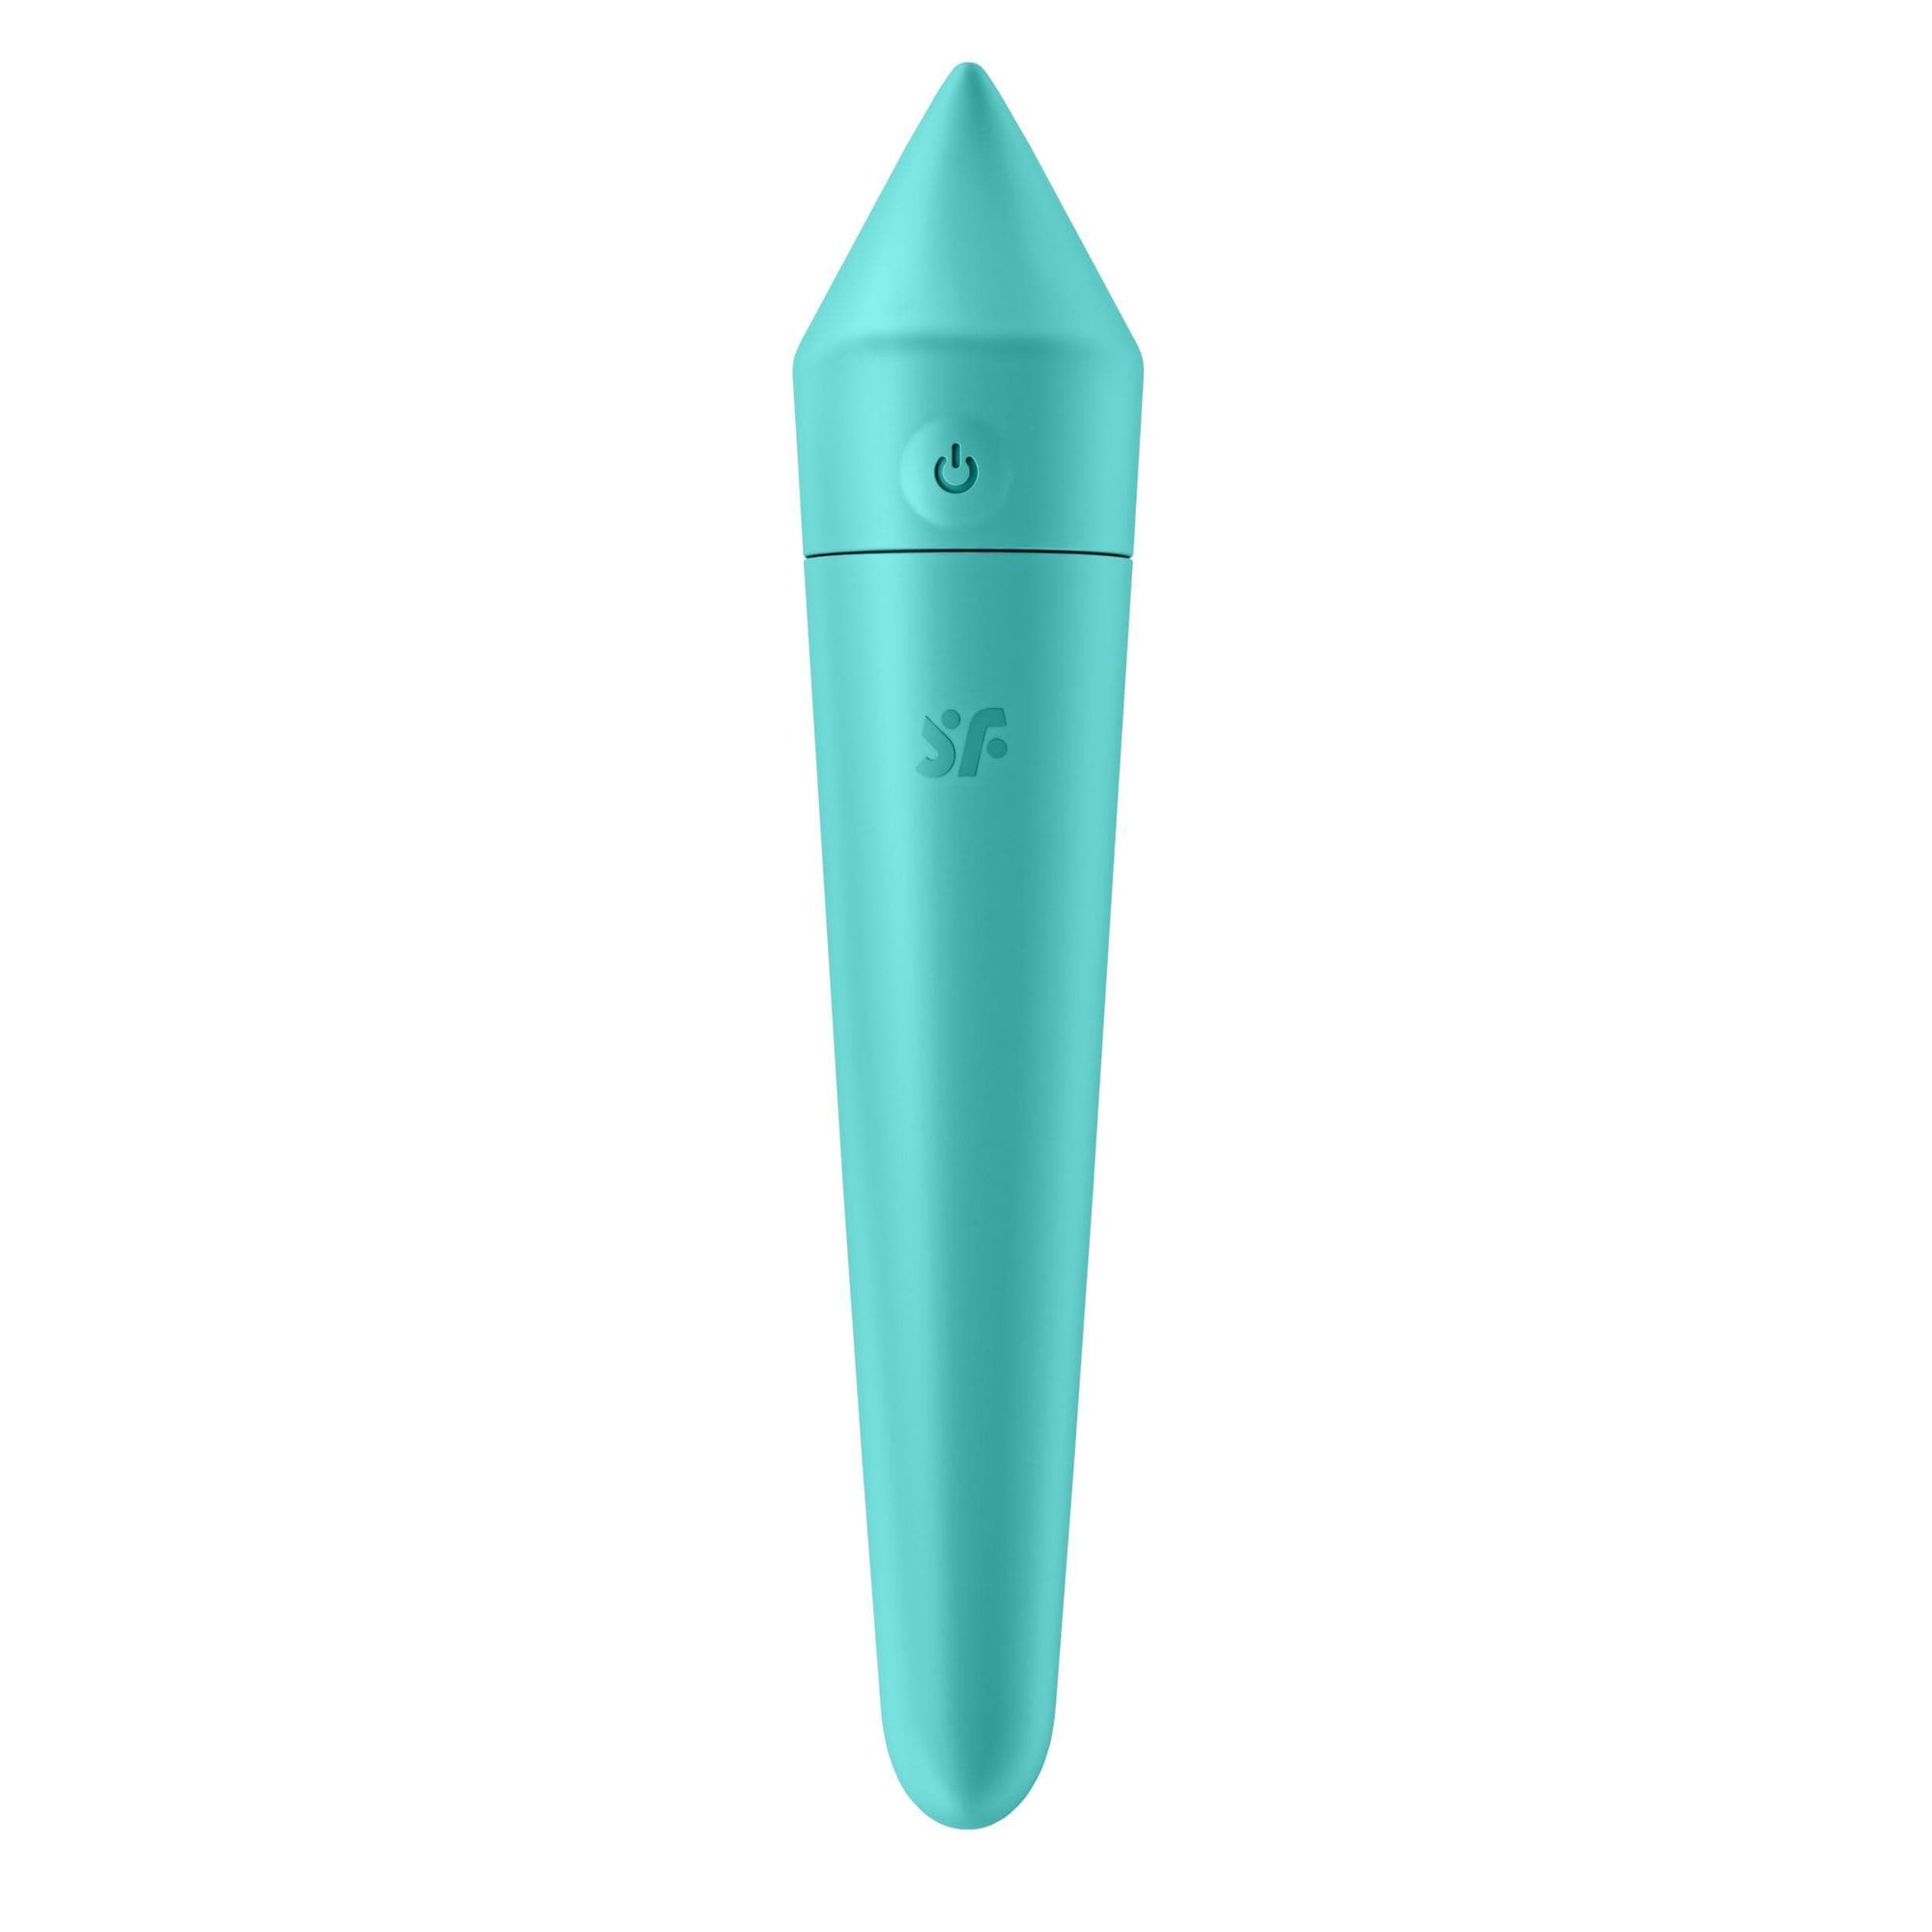 app controlled sex toy, remote control sex toy